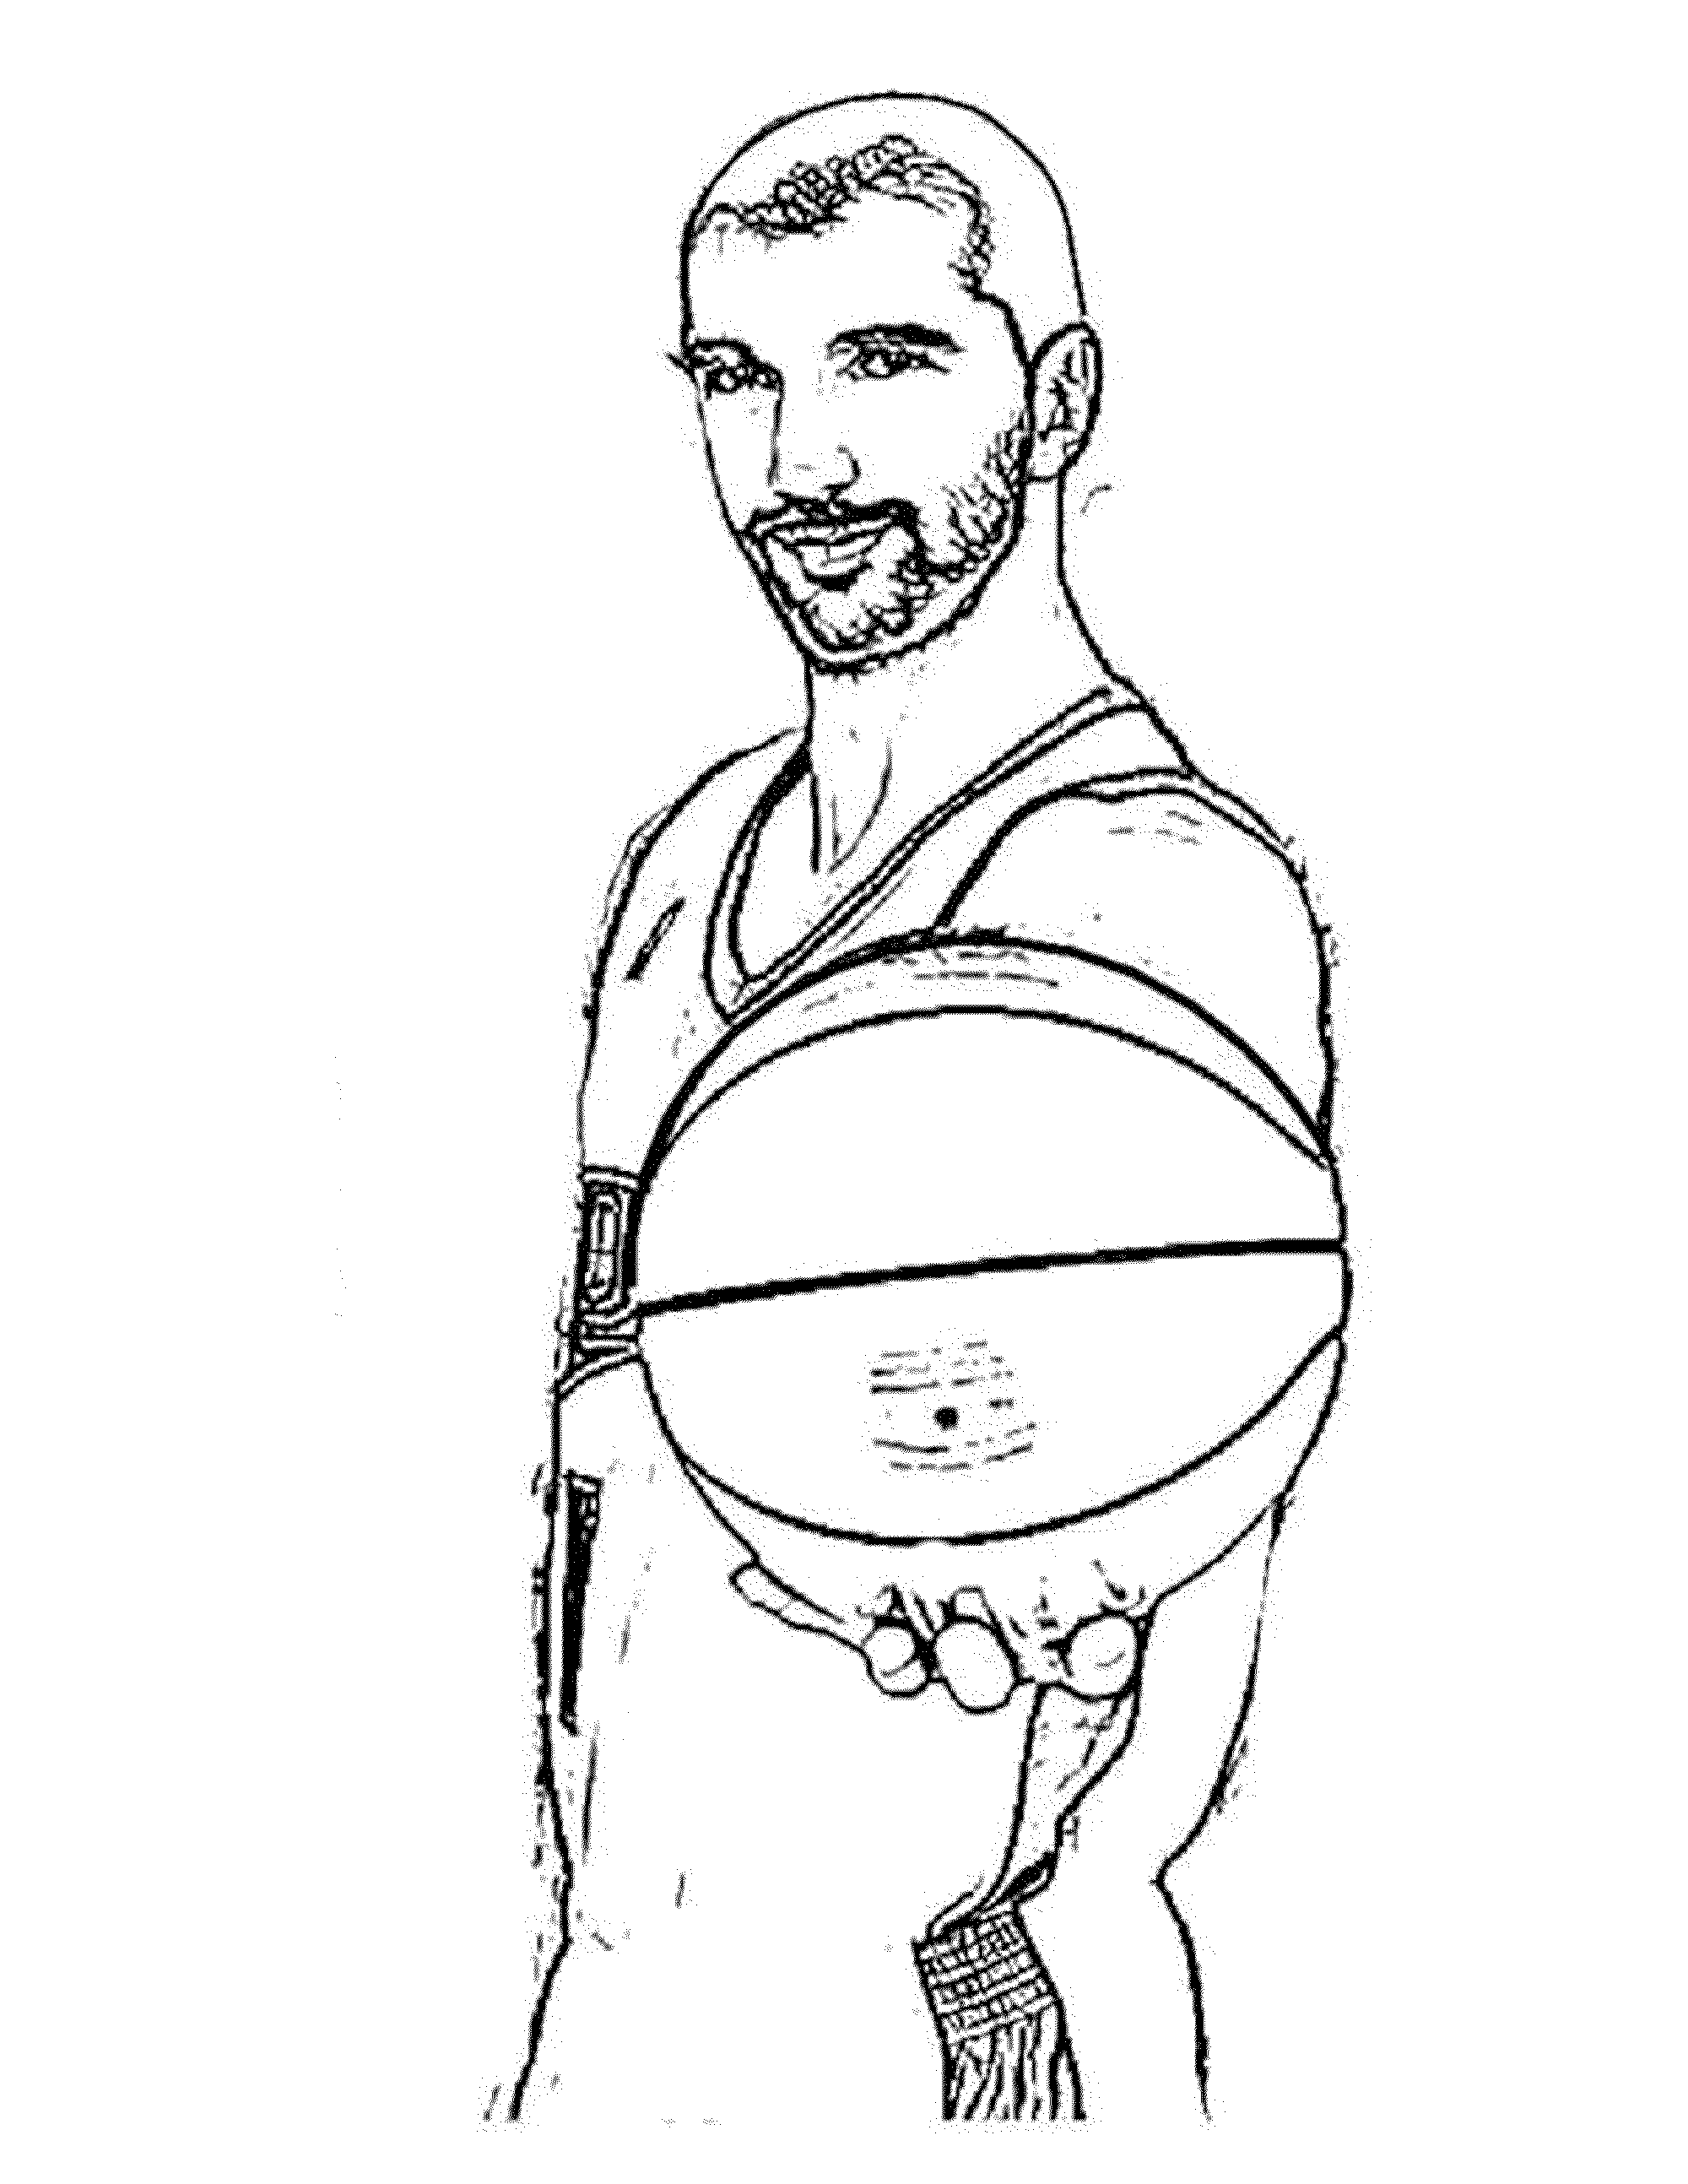 Print & Download - Interesting Basketball Coloring Pages